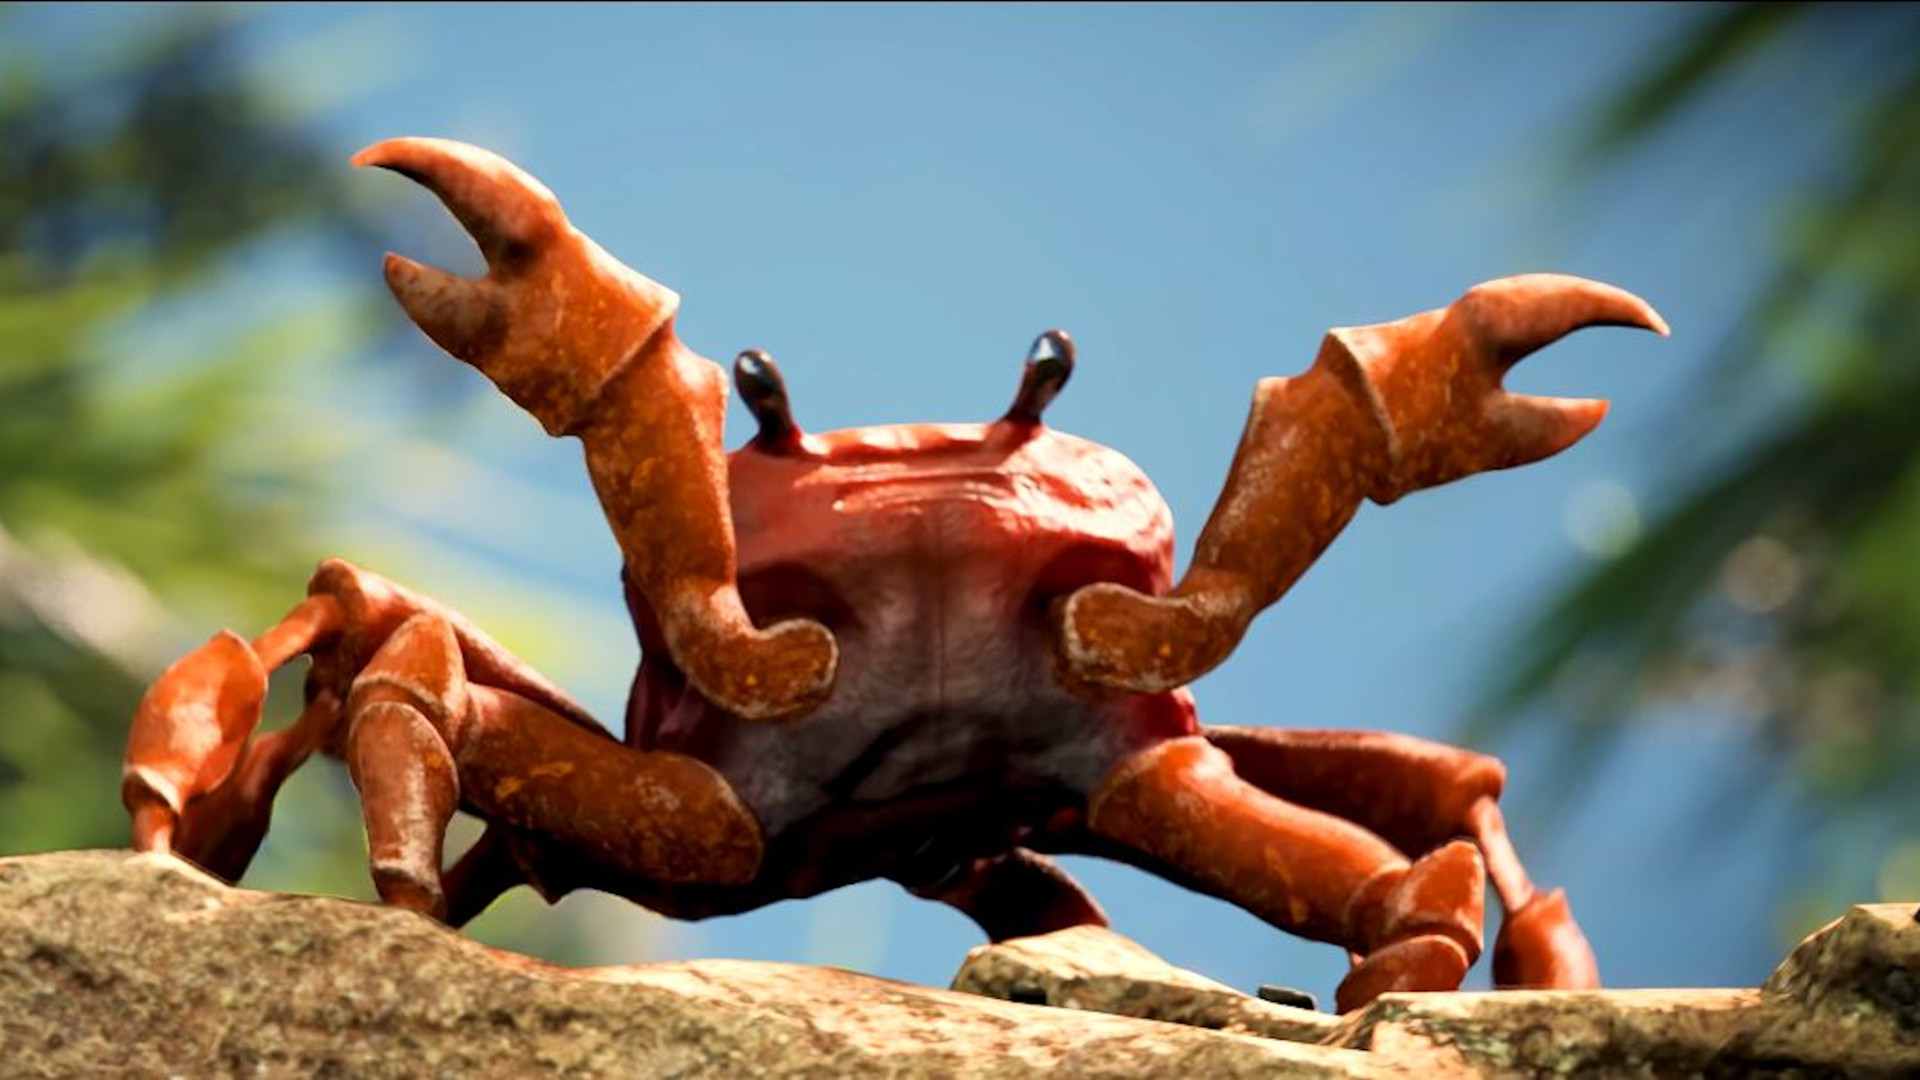 There's a crab rave easter egg in Battlefield V | The Loadout